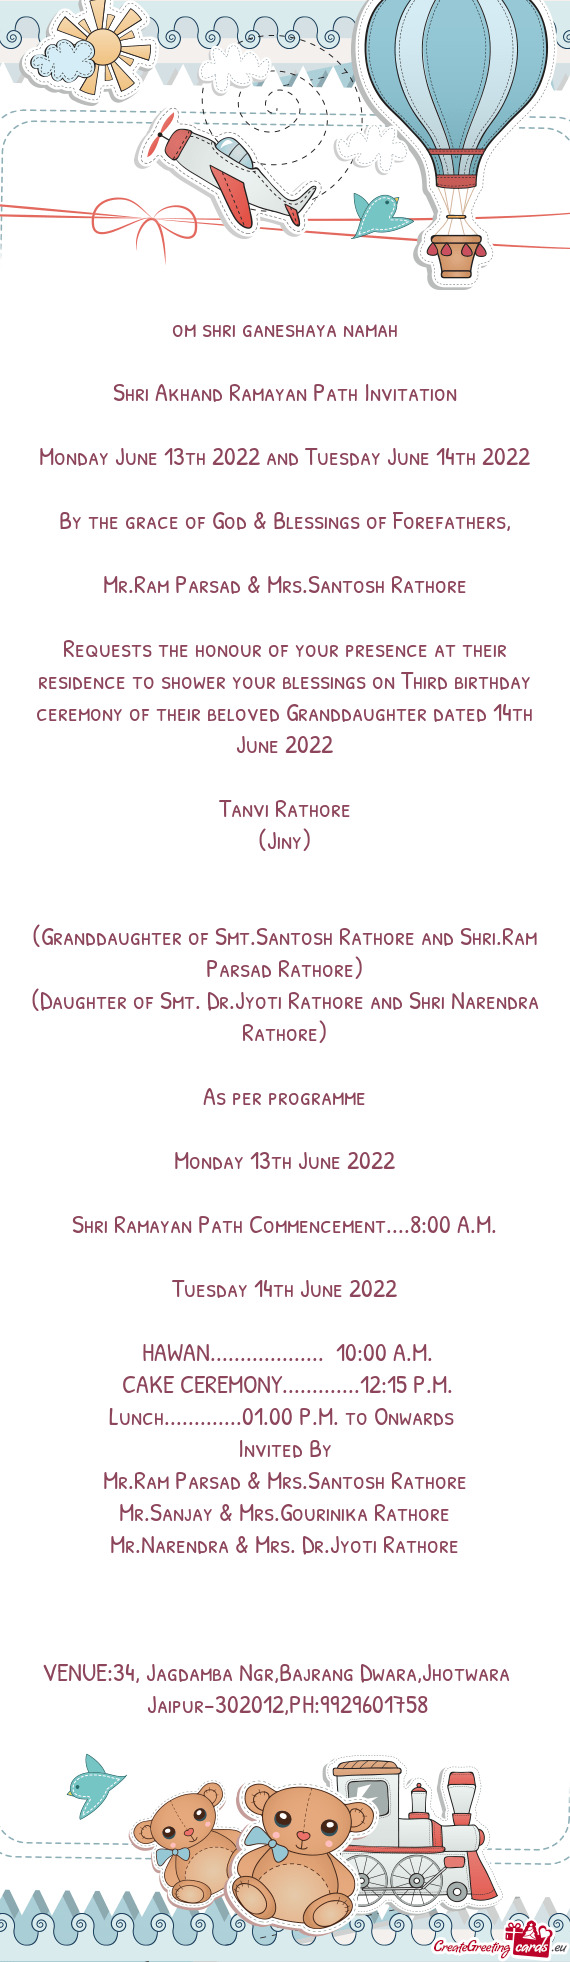 Eremony of their beloved Granddaughter dated 14th June 2022